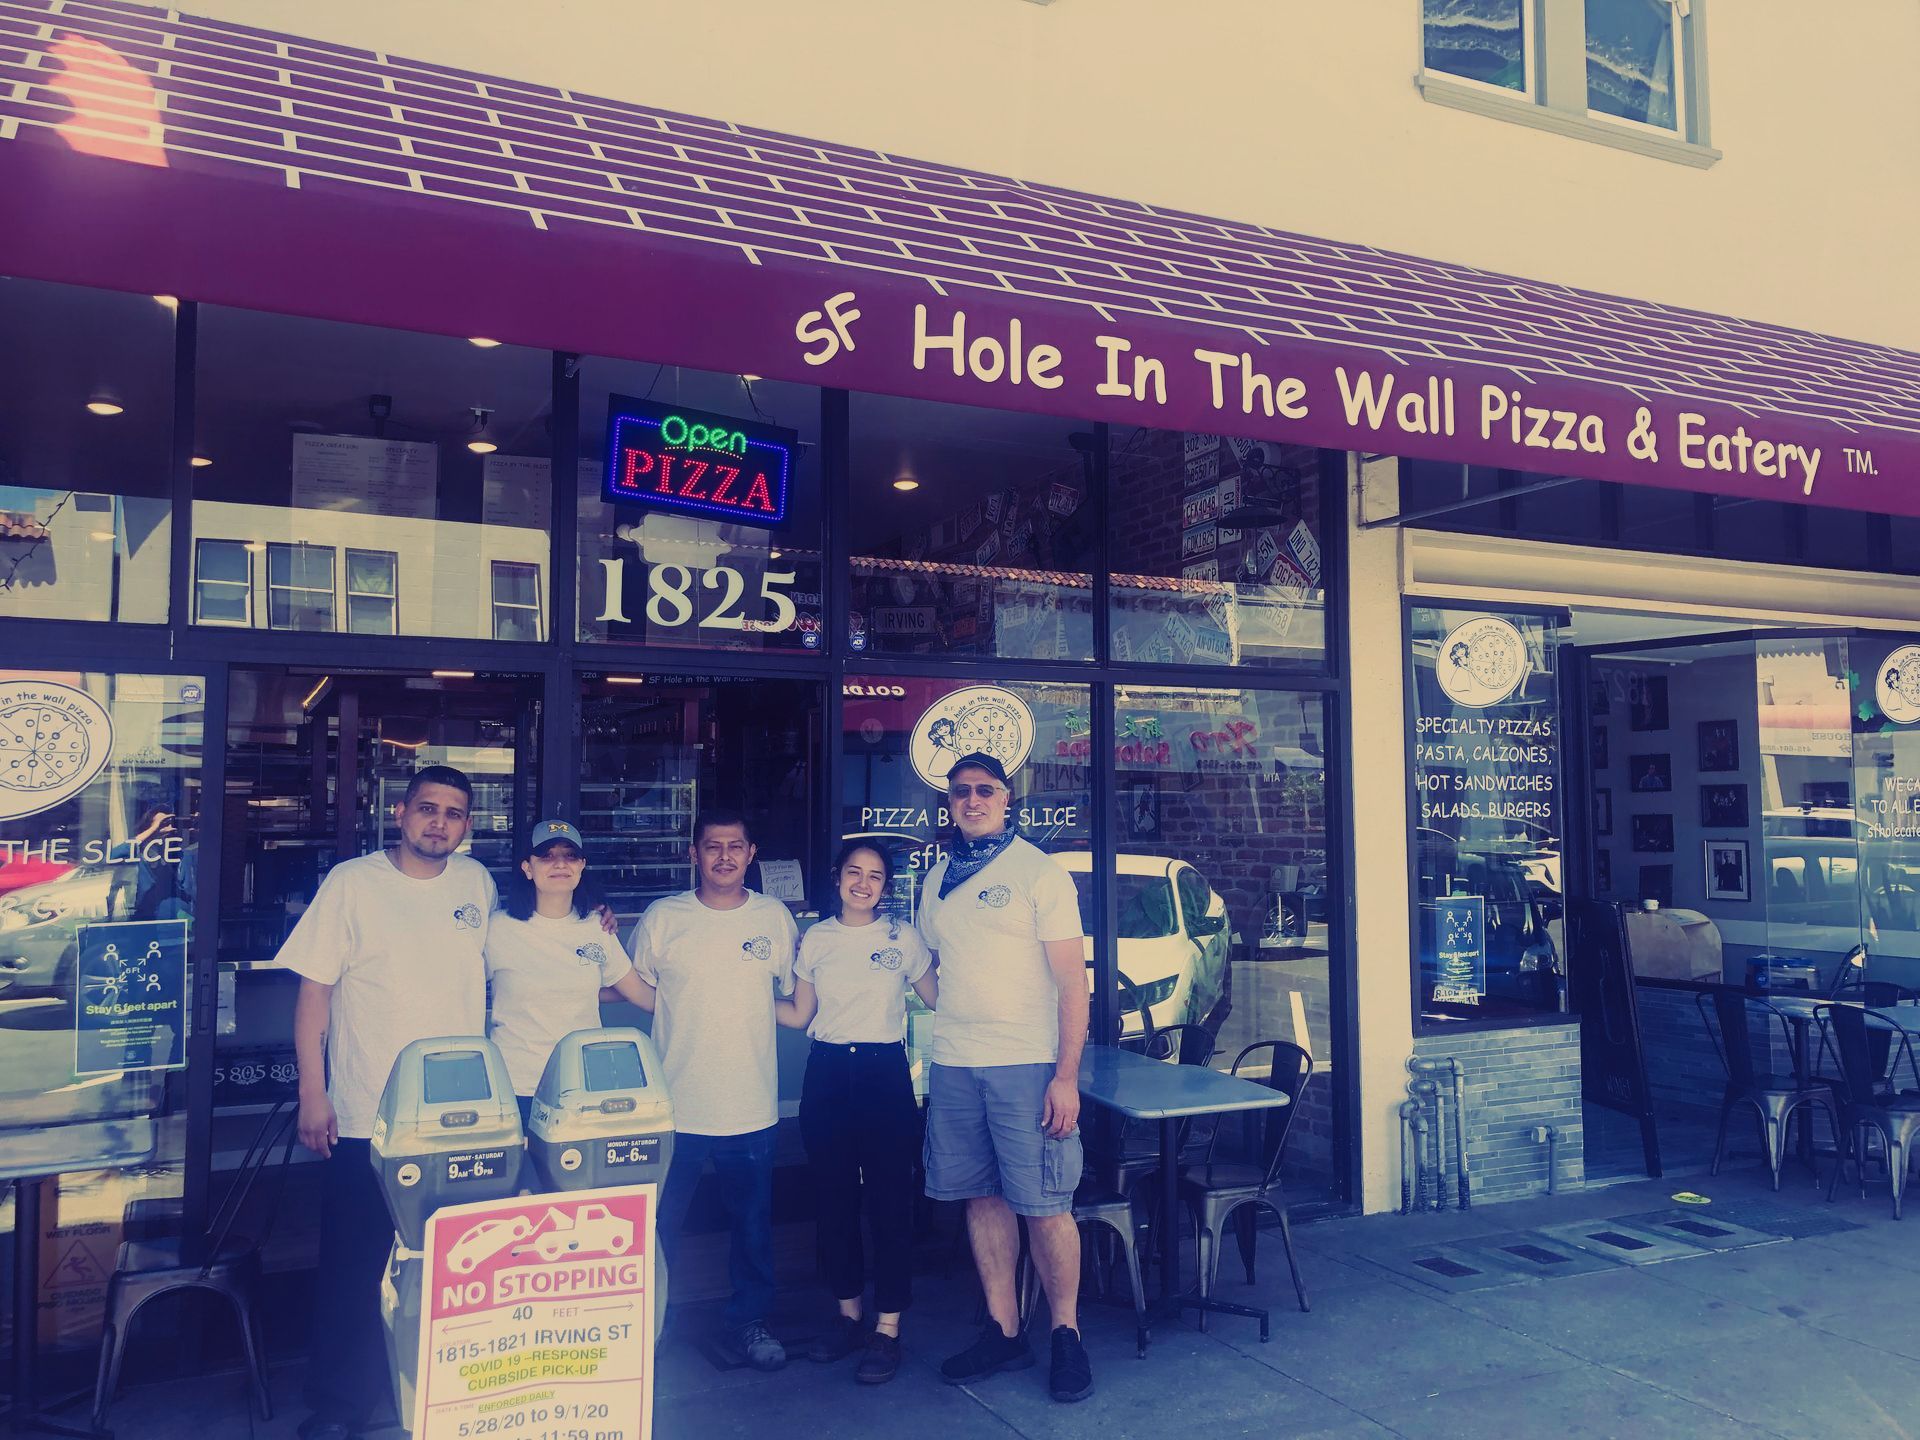 A group of people standing in front of a pizza restaurant.